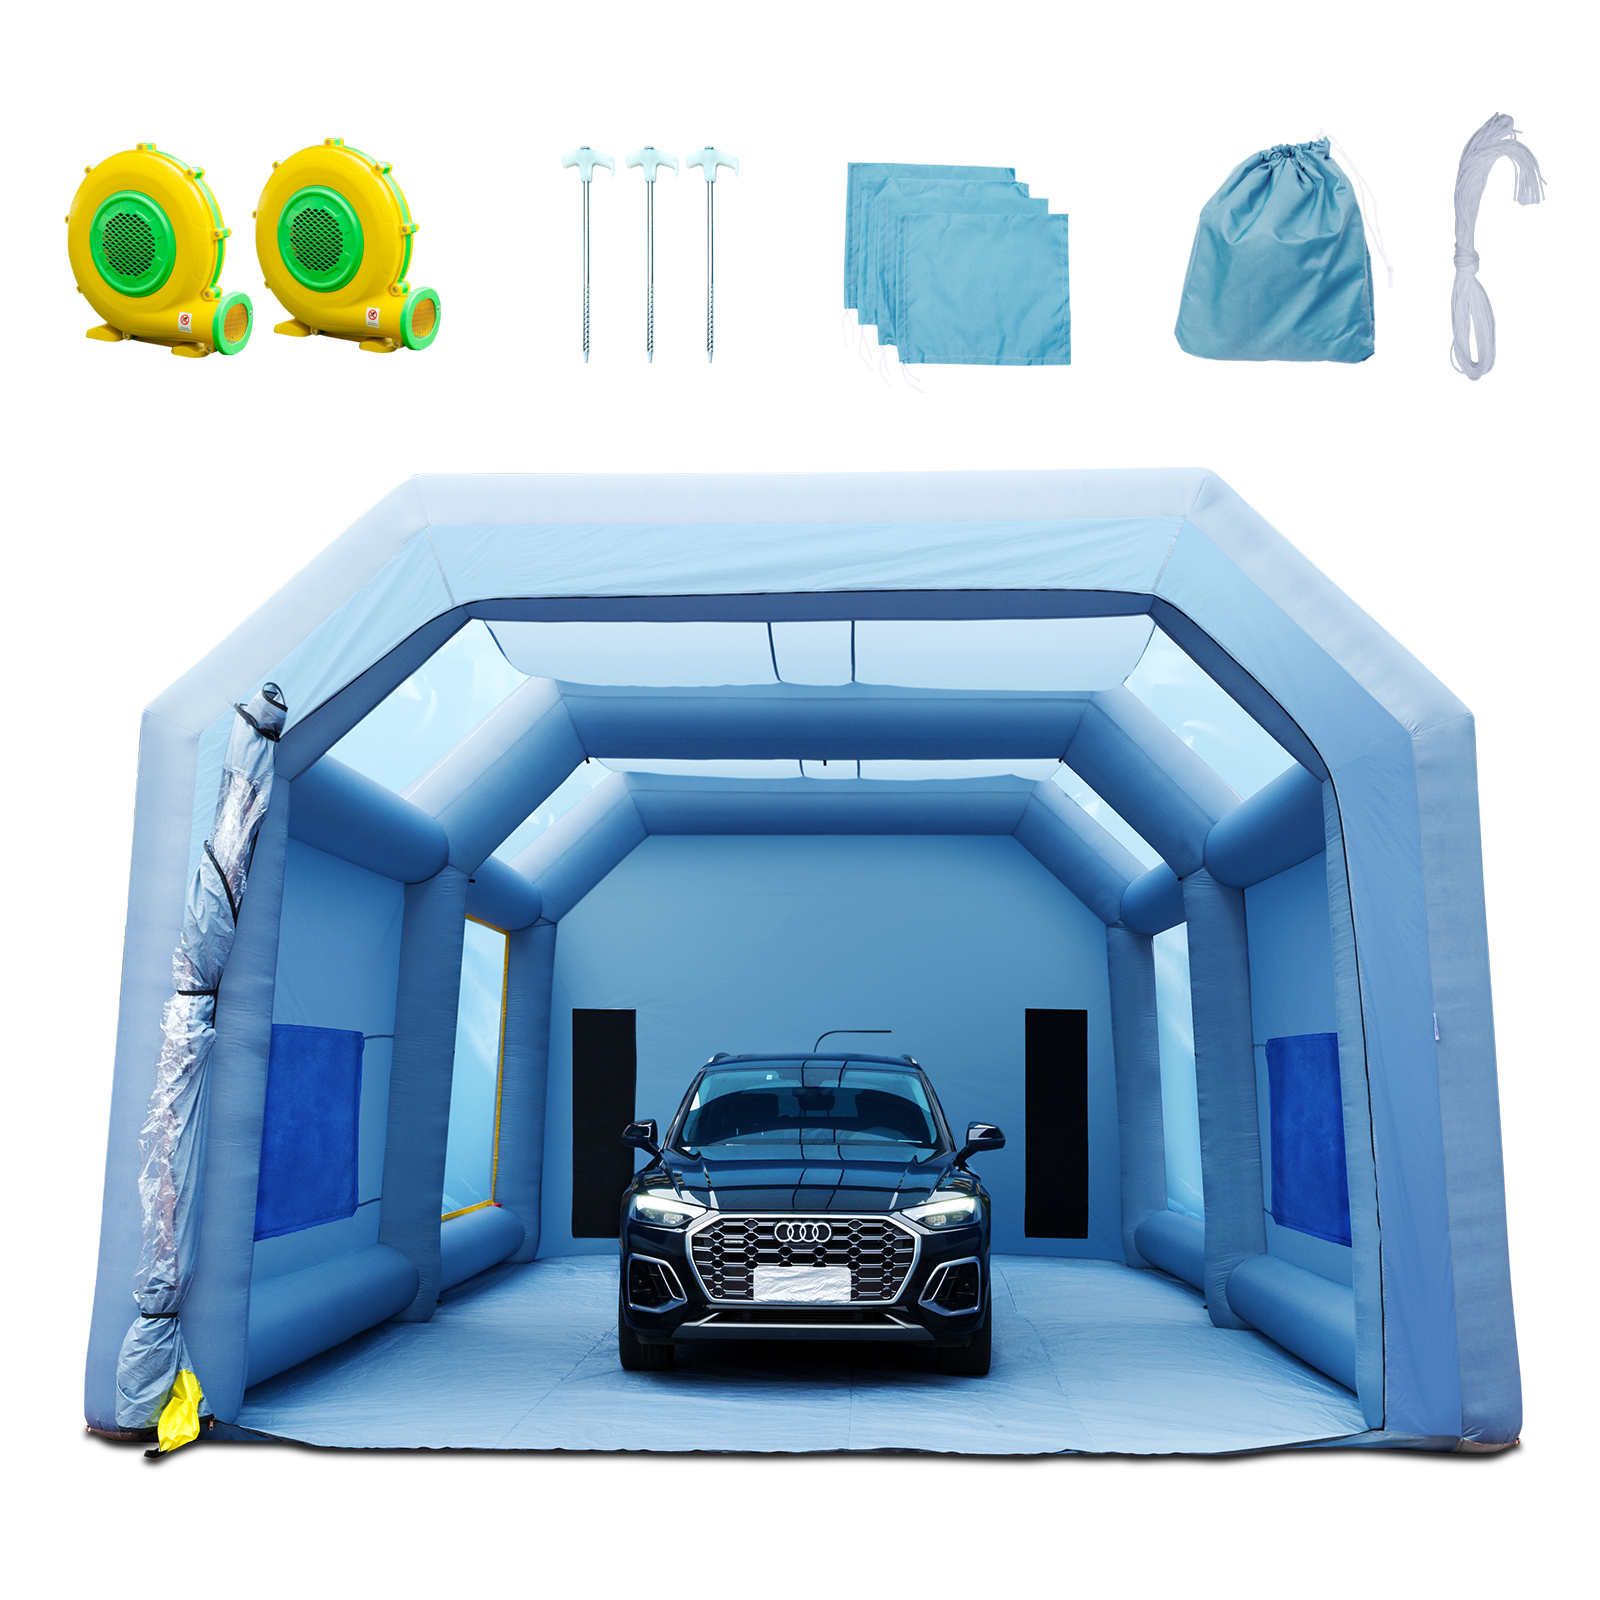 Inflatable Spray Booth,Tent,2 Blowers